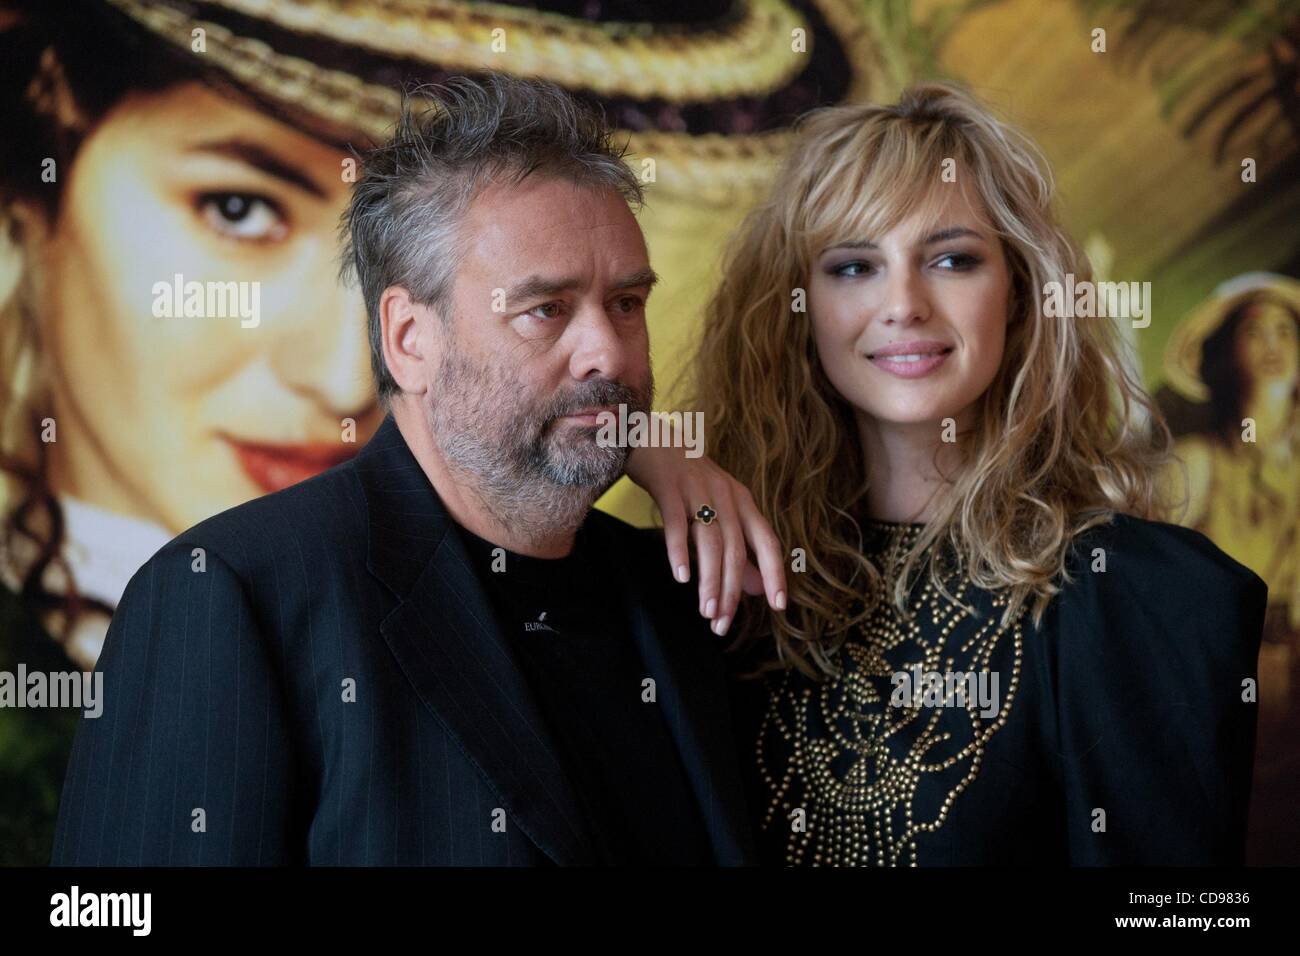 Jun 25, 2010 - Moscow, Russia - French film director LUC BESSON and French actress LOUISE BOURGOIN (r) at the press release of Besson's Les Aventures extraordinaires d'Adele Blanc', 'The Extraordinary Adventures of Adele Blanc-Sec' at the International Moscow Film Festival. (Credit Image: © PhotoXpr Stock Photo